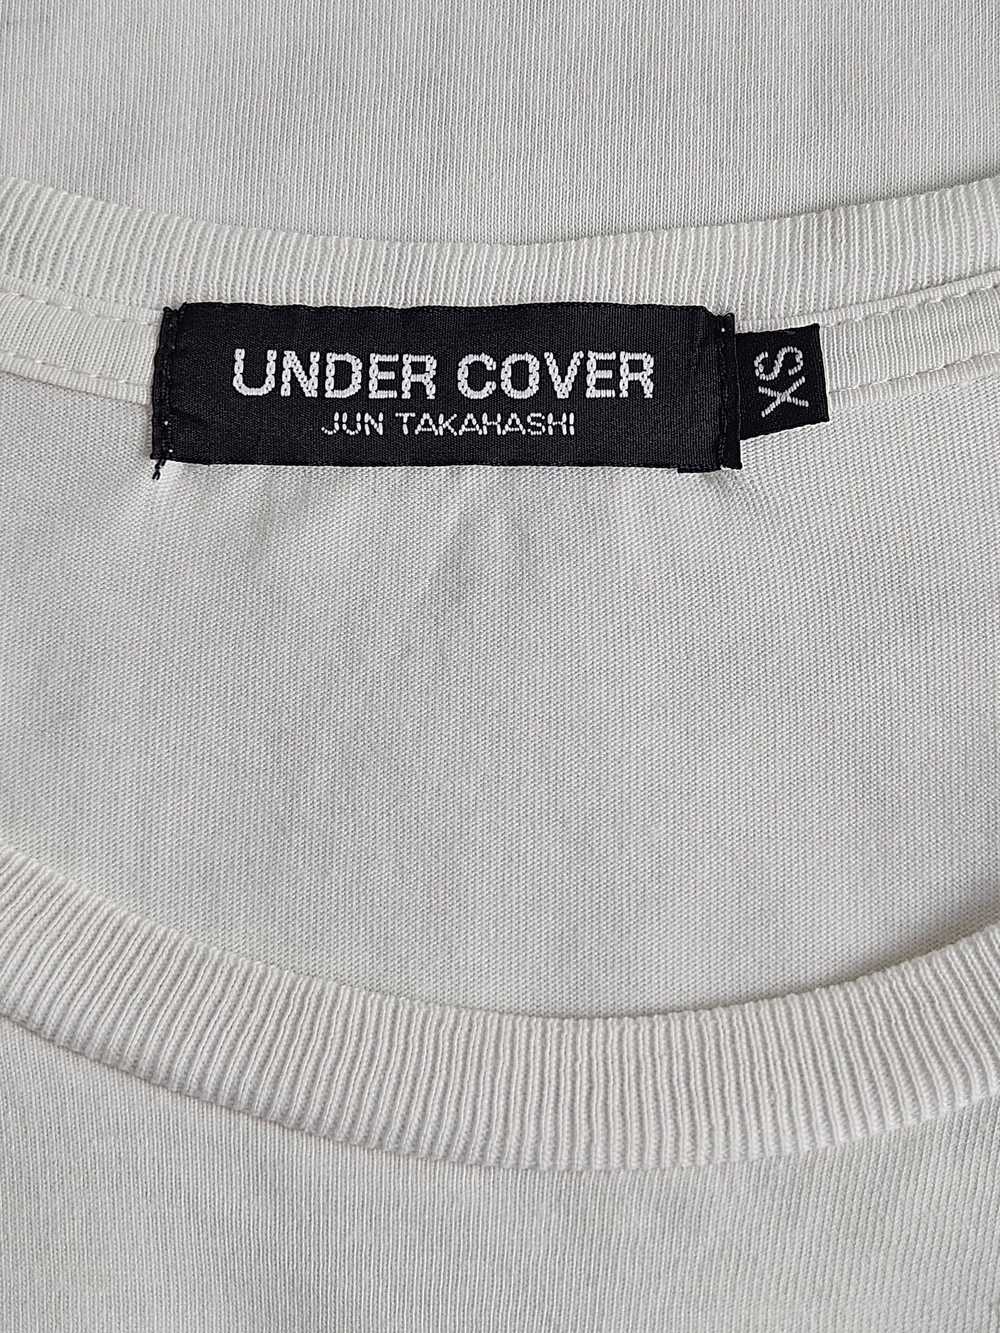 Undercover Undercover We Make Noise shirt - image 4